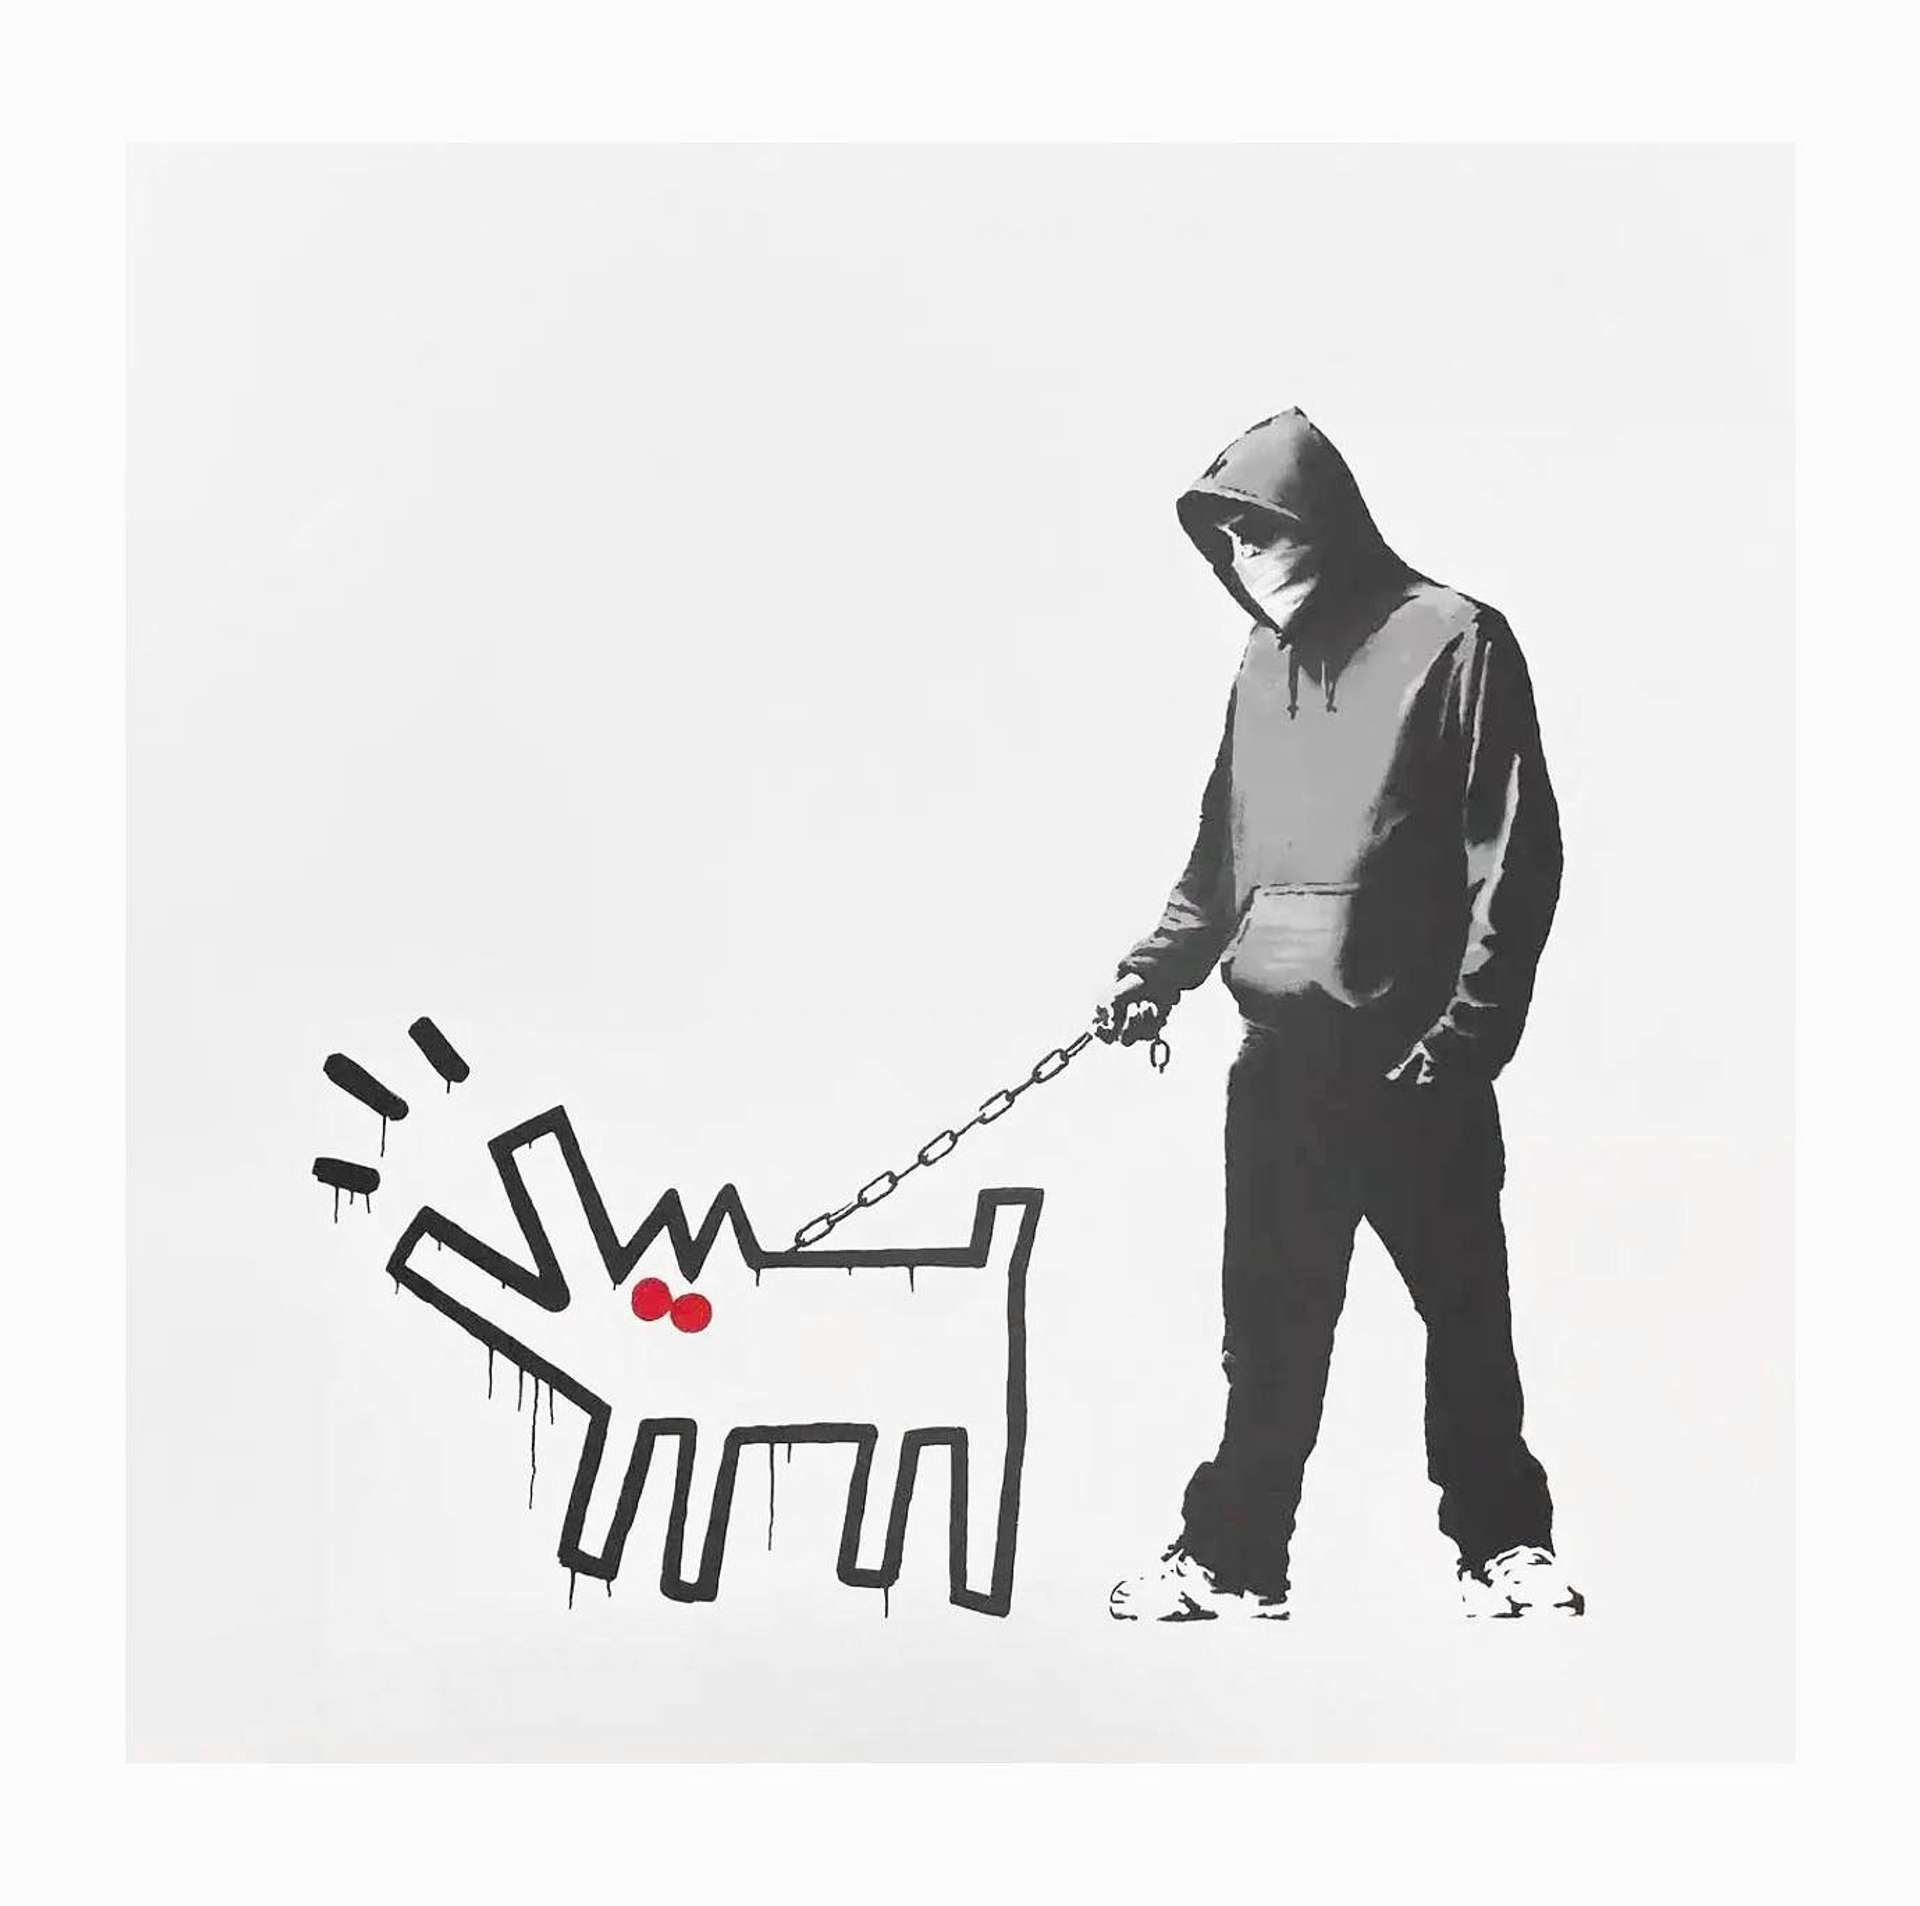 A young man wearing denim and an oversized hooded sweatshirt, with a bandana covering his face and his hood pulled up, stands in a wide stance. He has one hand in his pocket and holds a cartoon barking dog on a chain leash. The artwork is set against a white background.